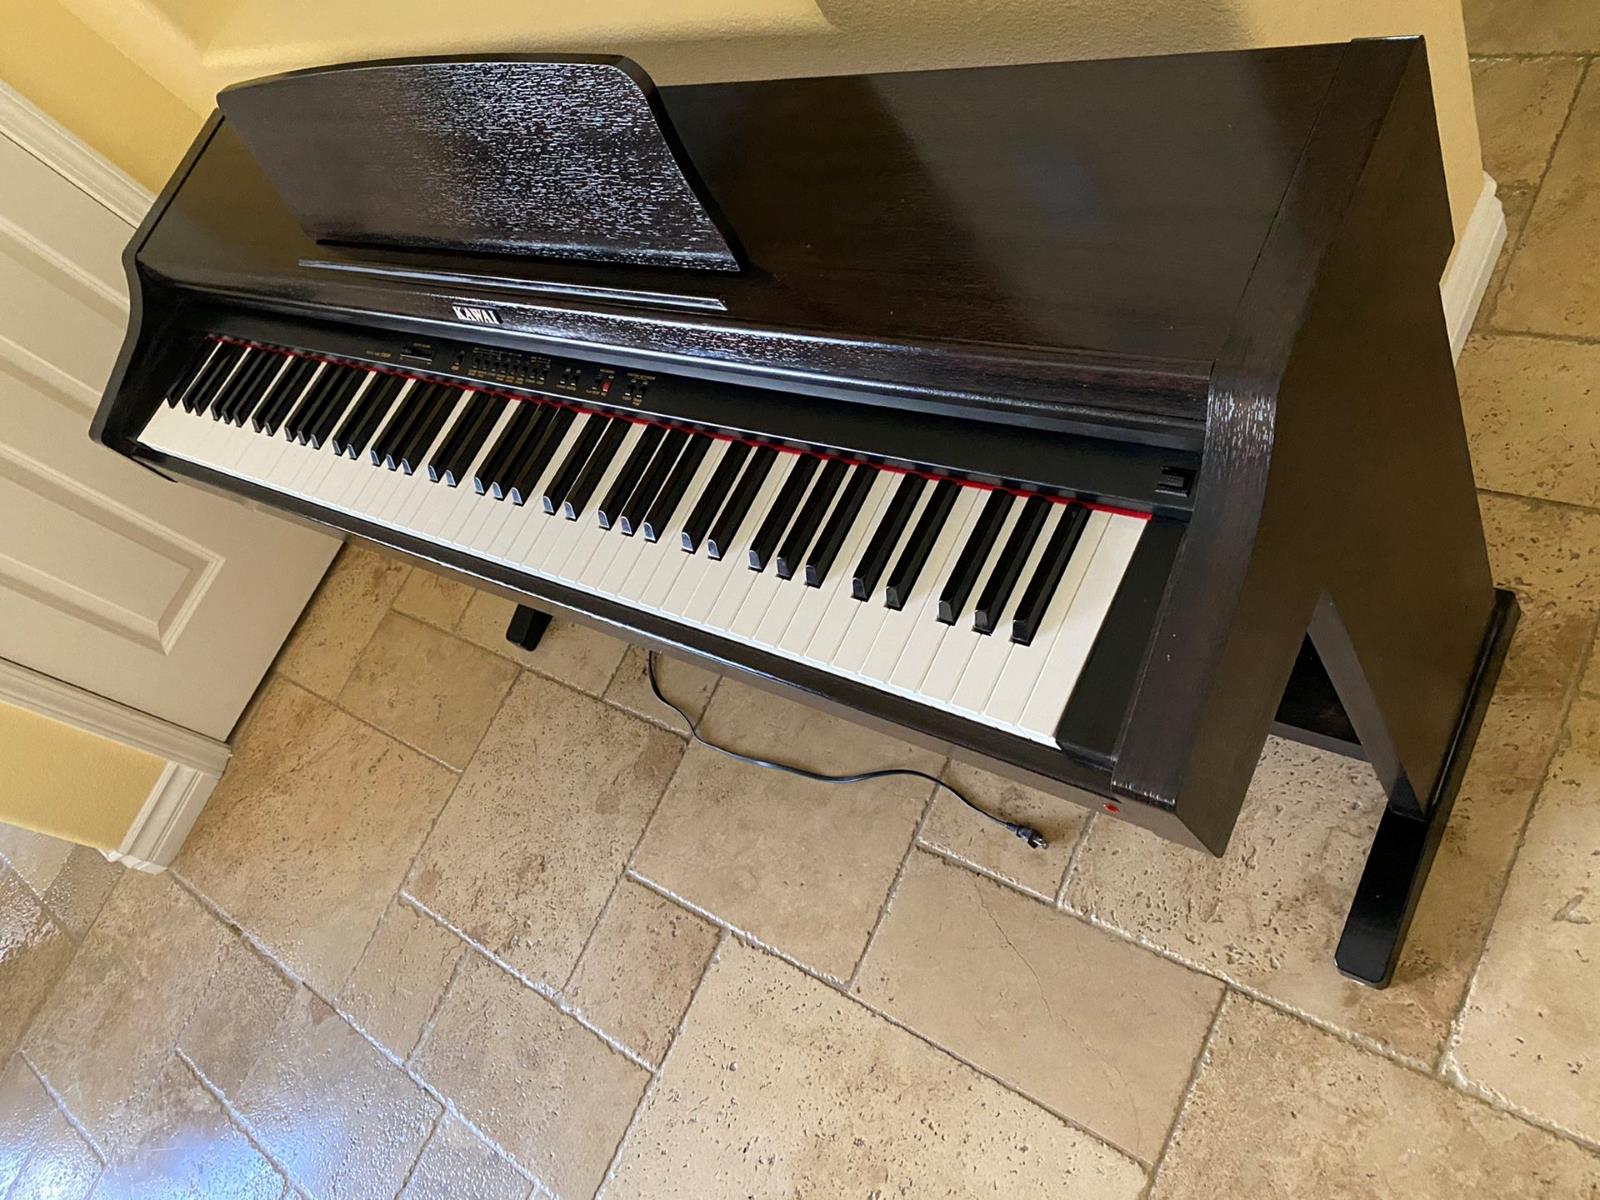 How To Replace The Power Switch On Kawai CN290 Digital Piano